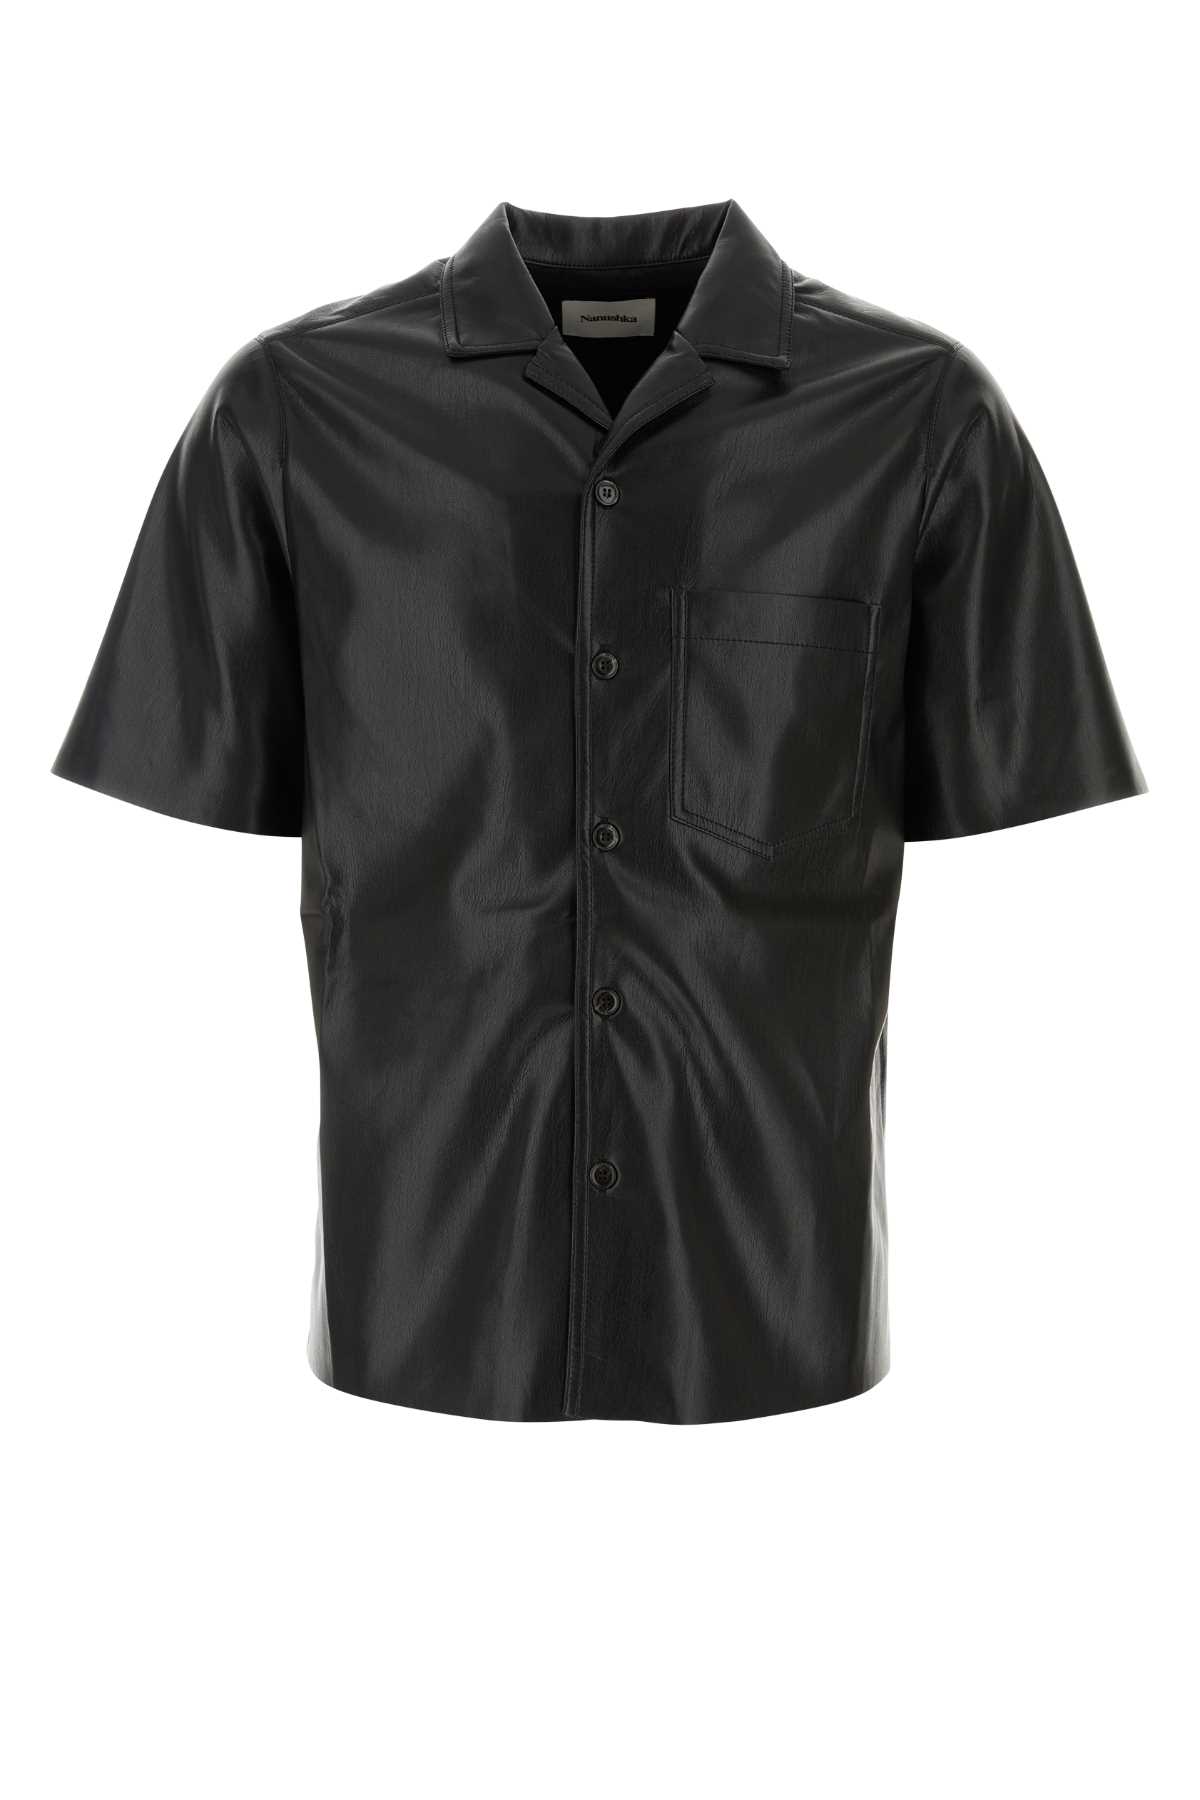 Black Synthetic Leather Bodil Shirt